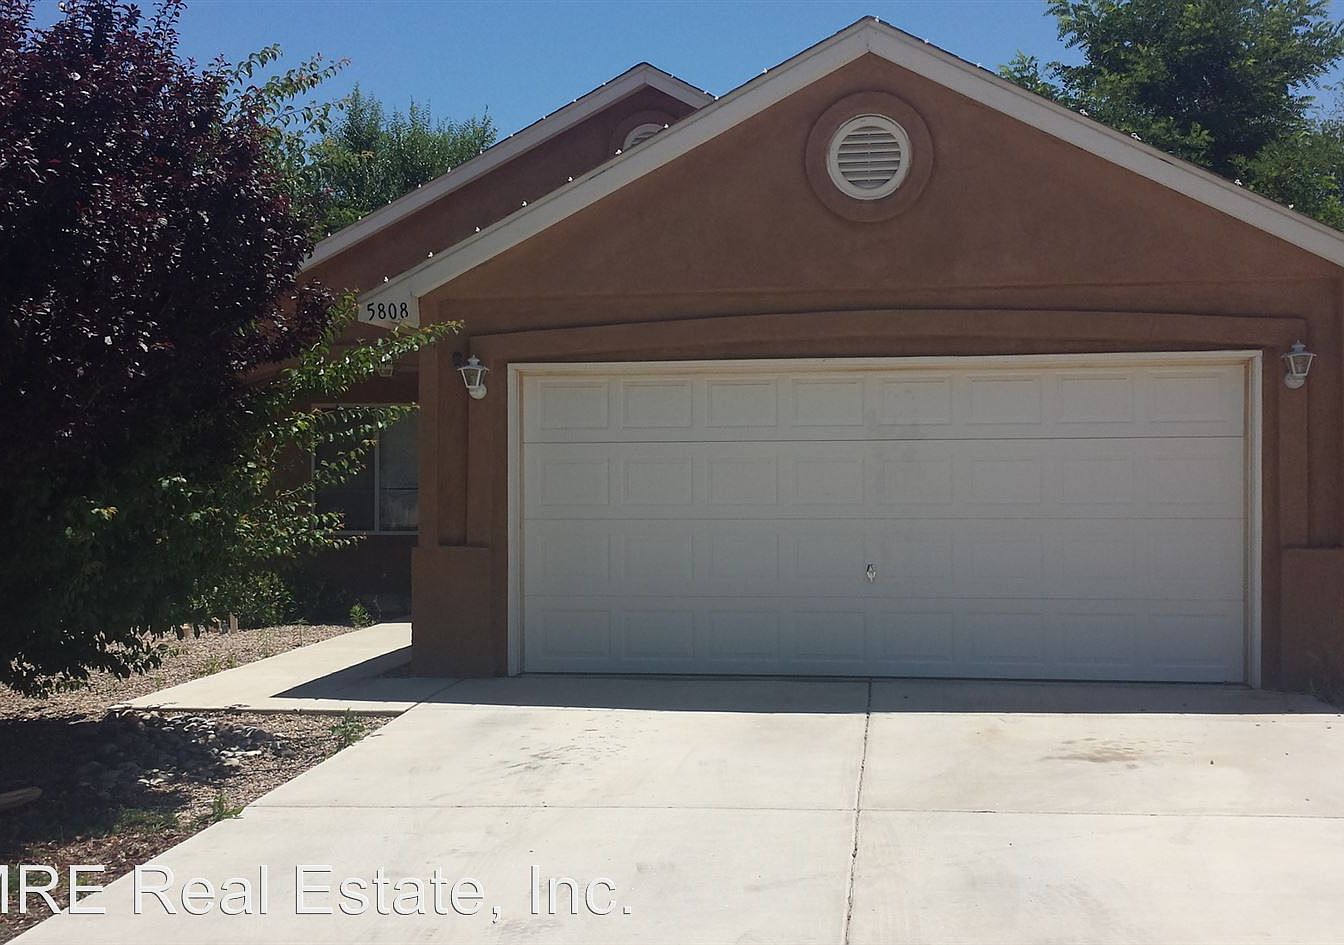 5808 Night Rose Ave NW, Albuquerque, NM 87114 | Zillow